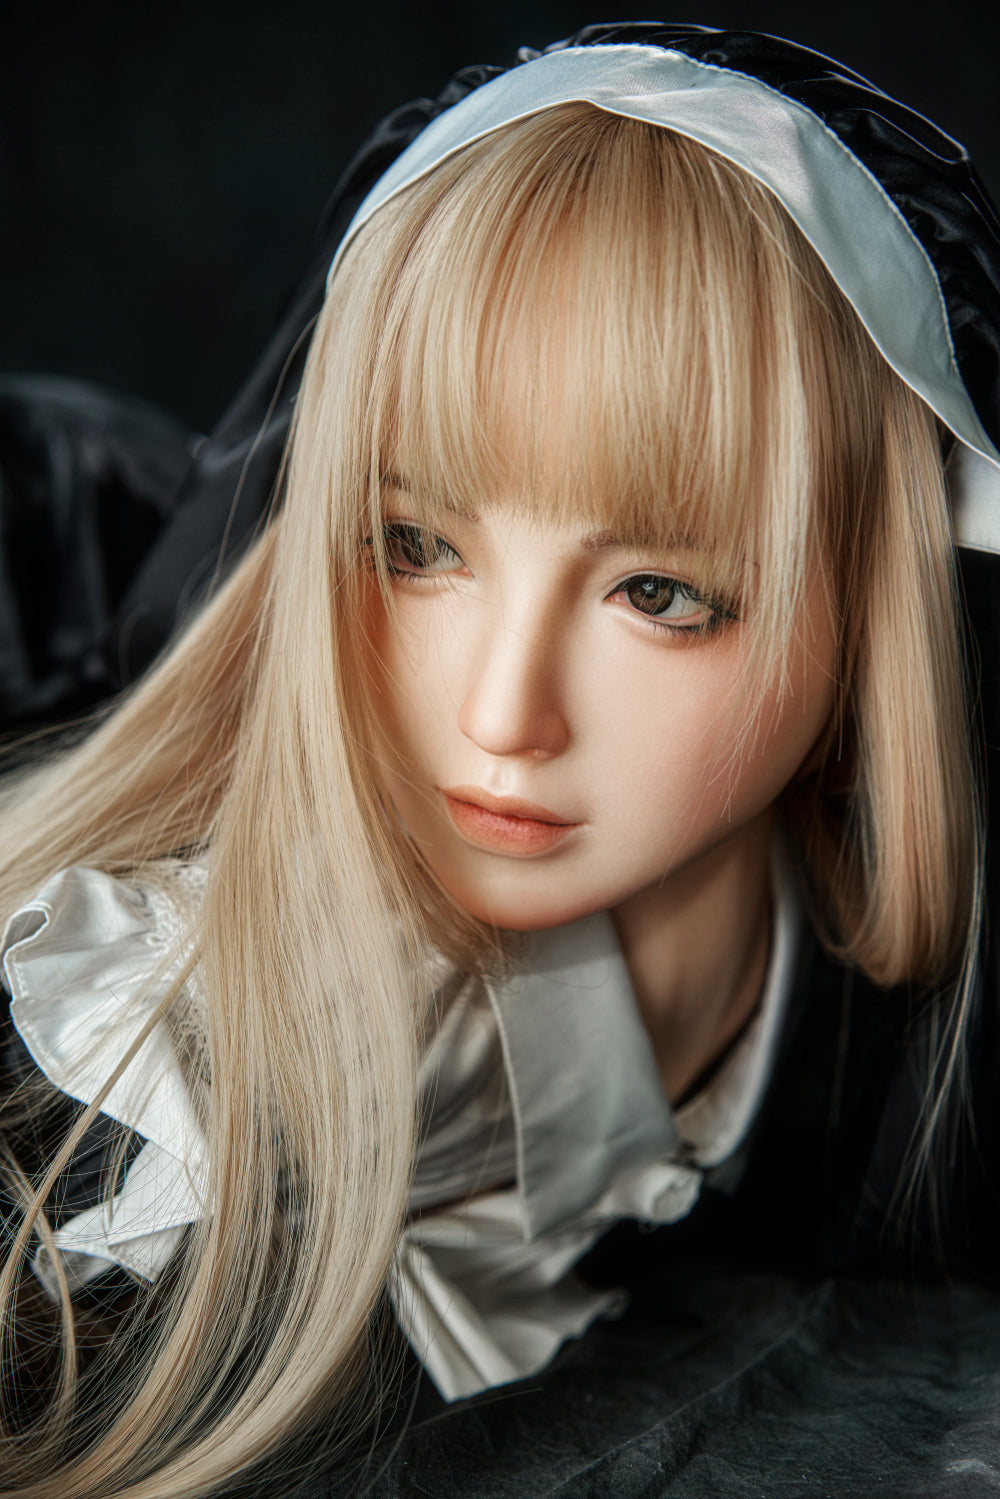 Zelex Doll 143 cm G Silicone - Fai (SG) | Buy Sex Dolls at DOLLS ACTUALLY